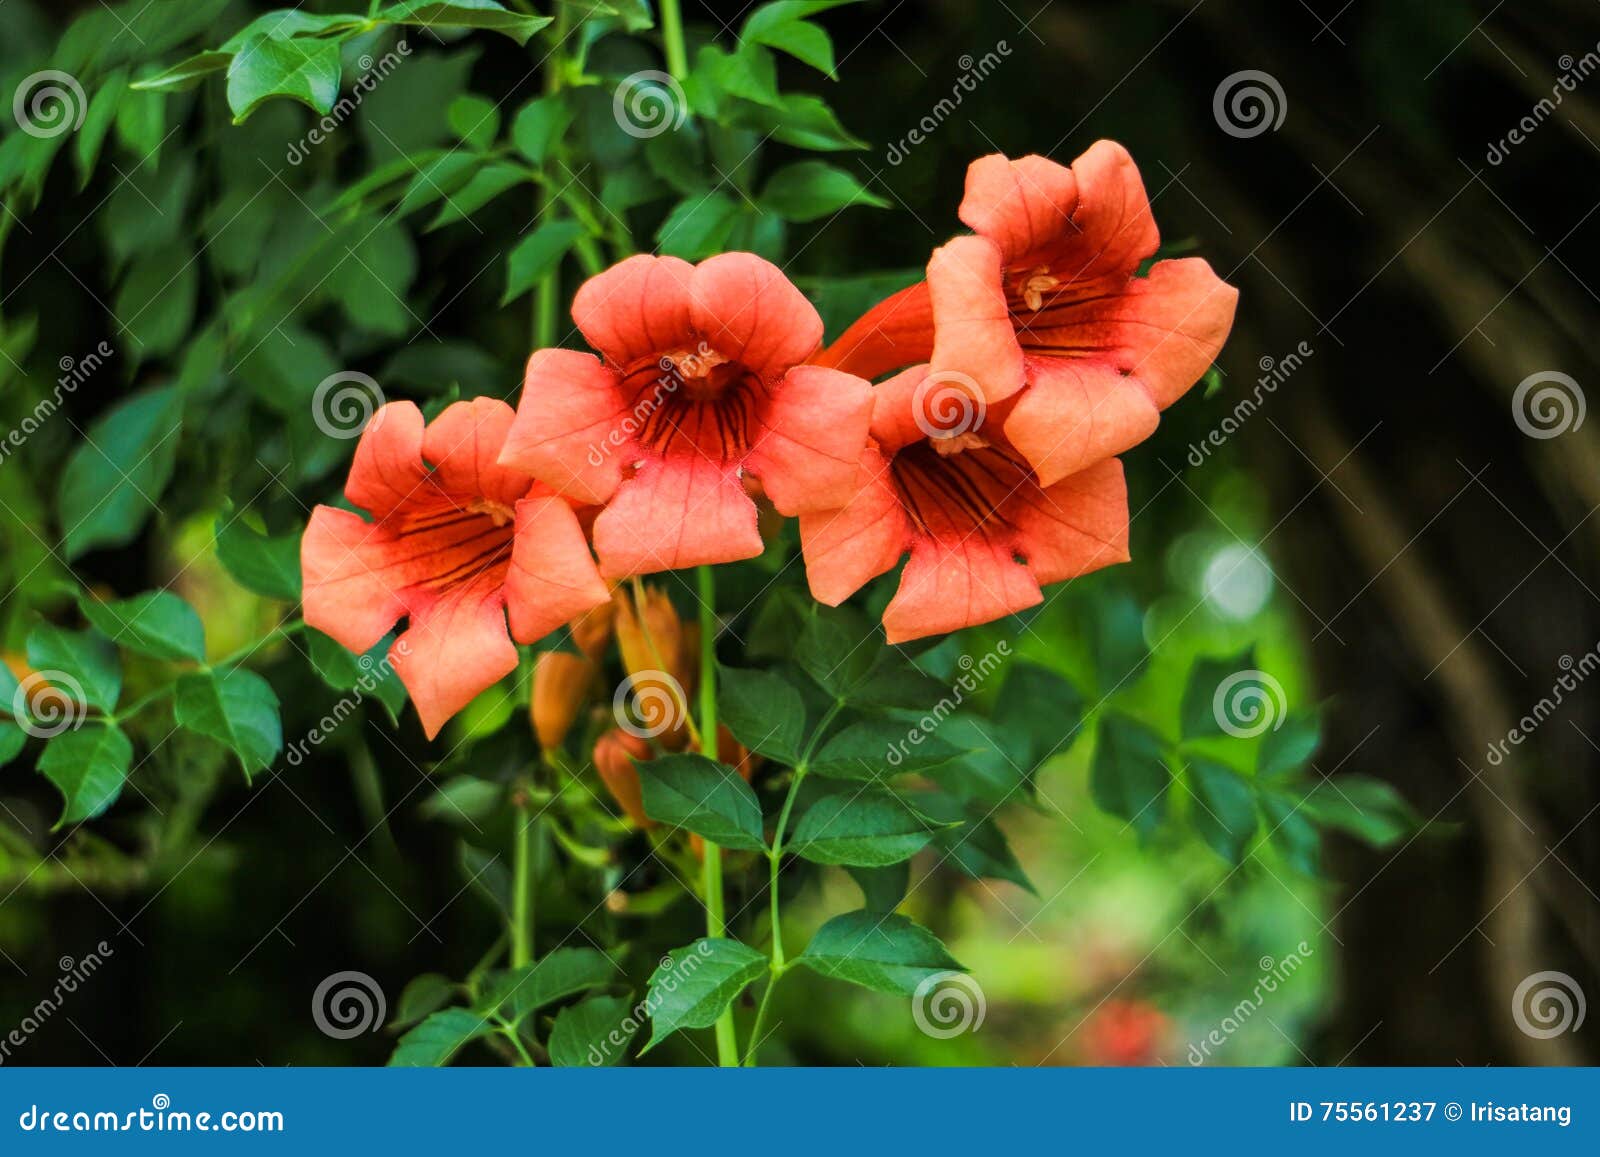 Chinese trumpet creeper stock image. Image of lingxiaohua - 75938903